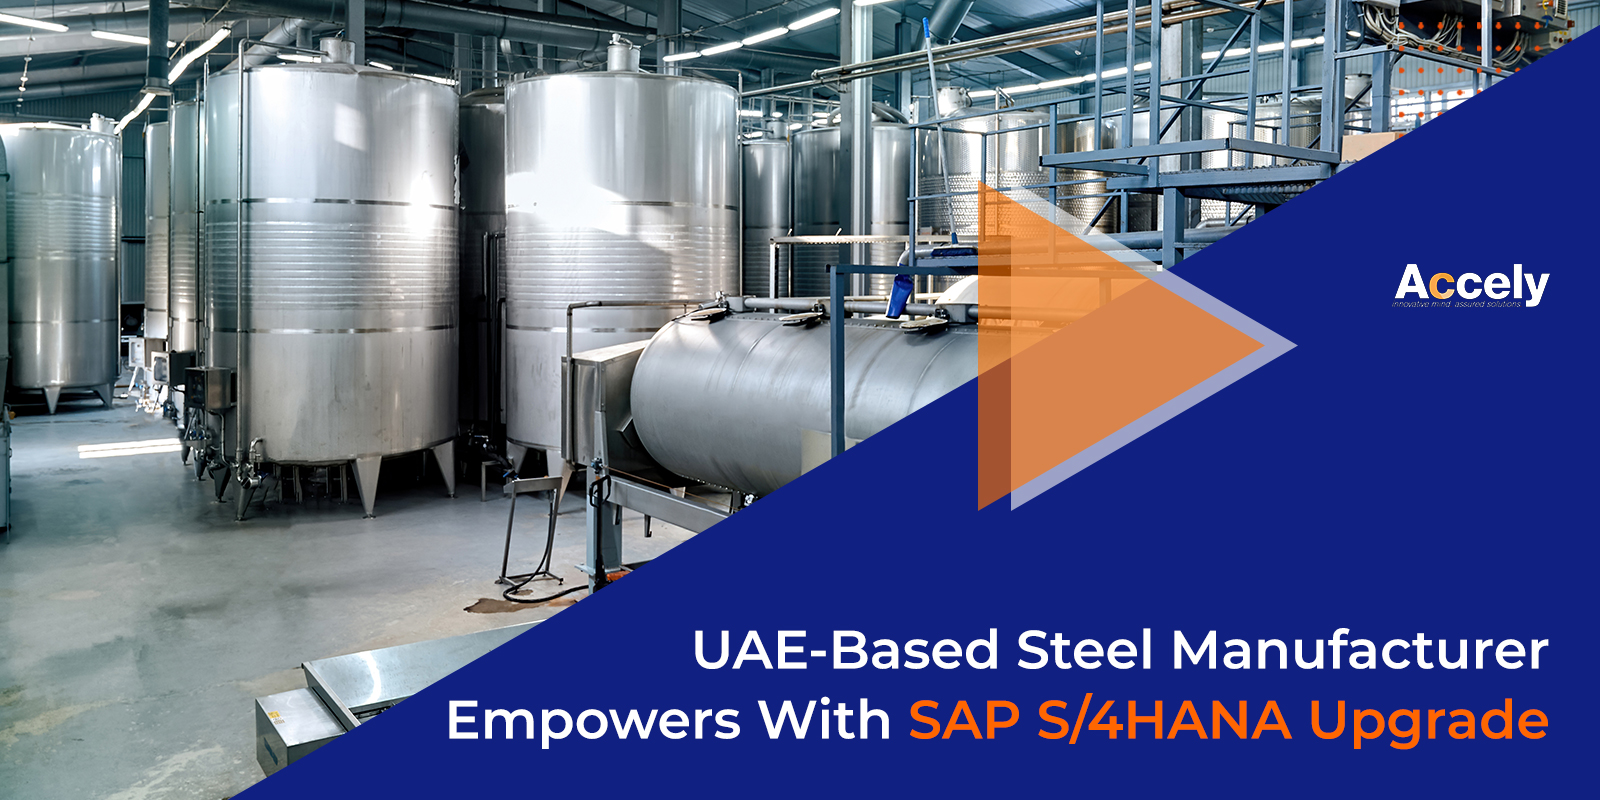 UAE-Based Steel Manufacturer Empowers With SAP S/4HANA Upgrade